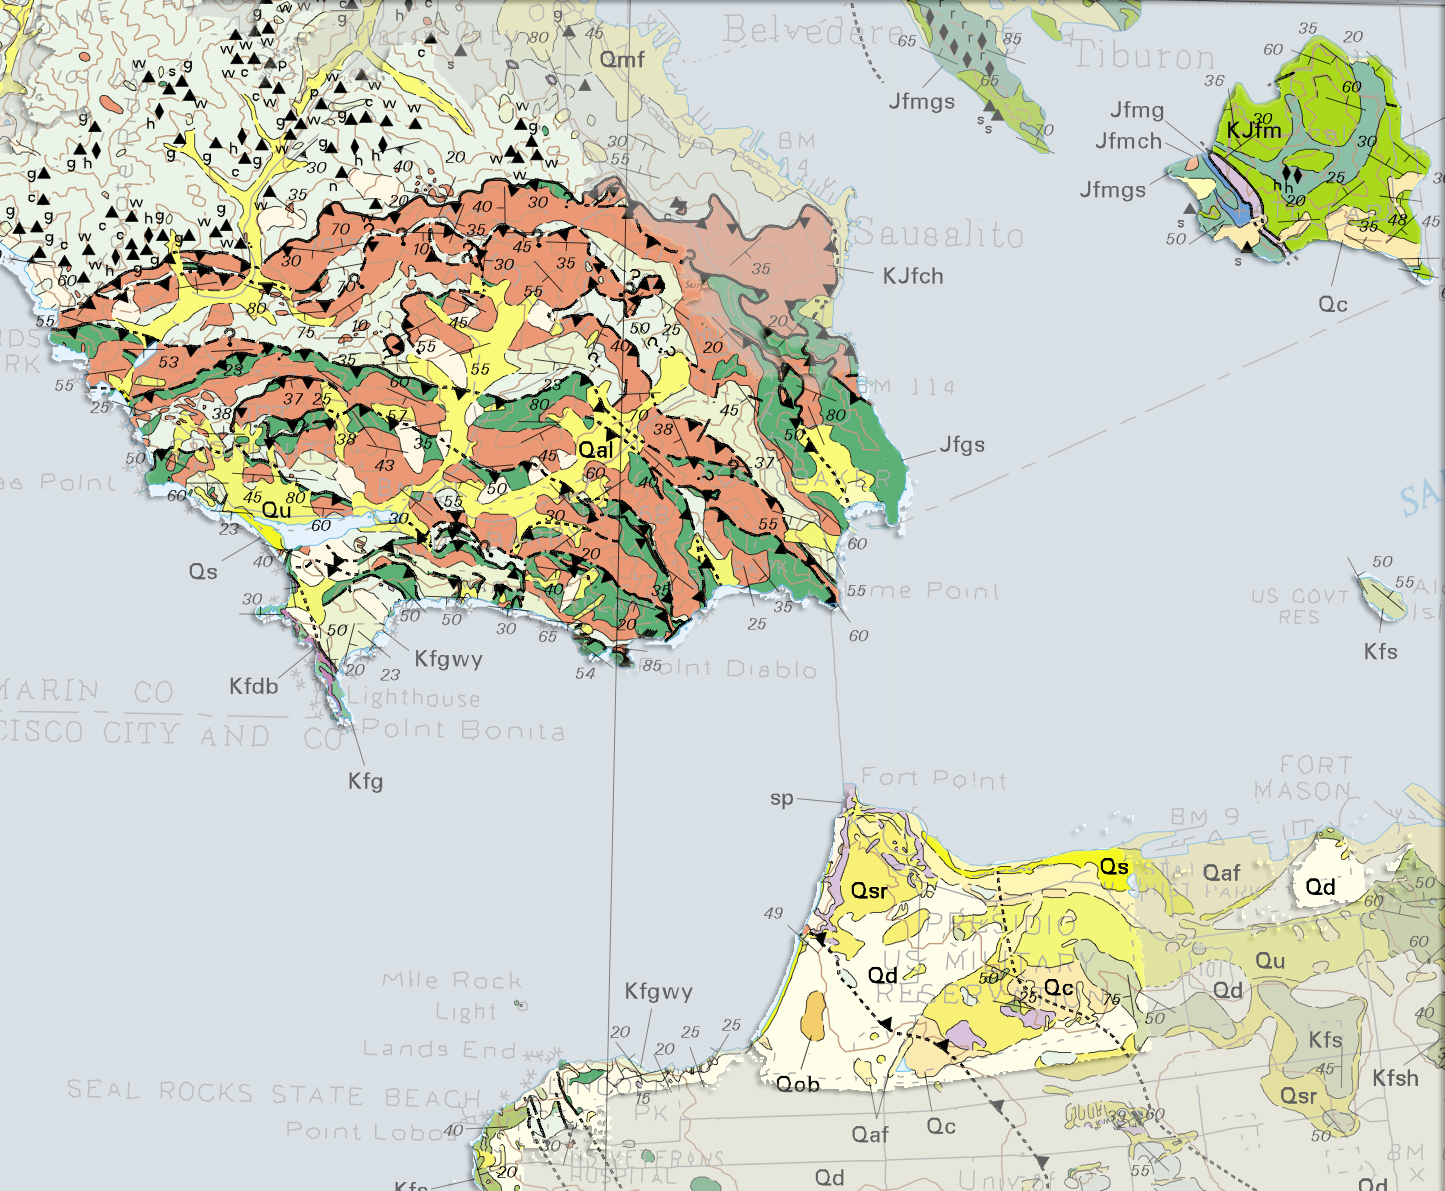 Geologic map of the Golden Gate National Recreation Area